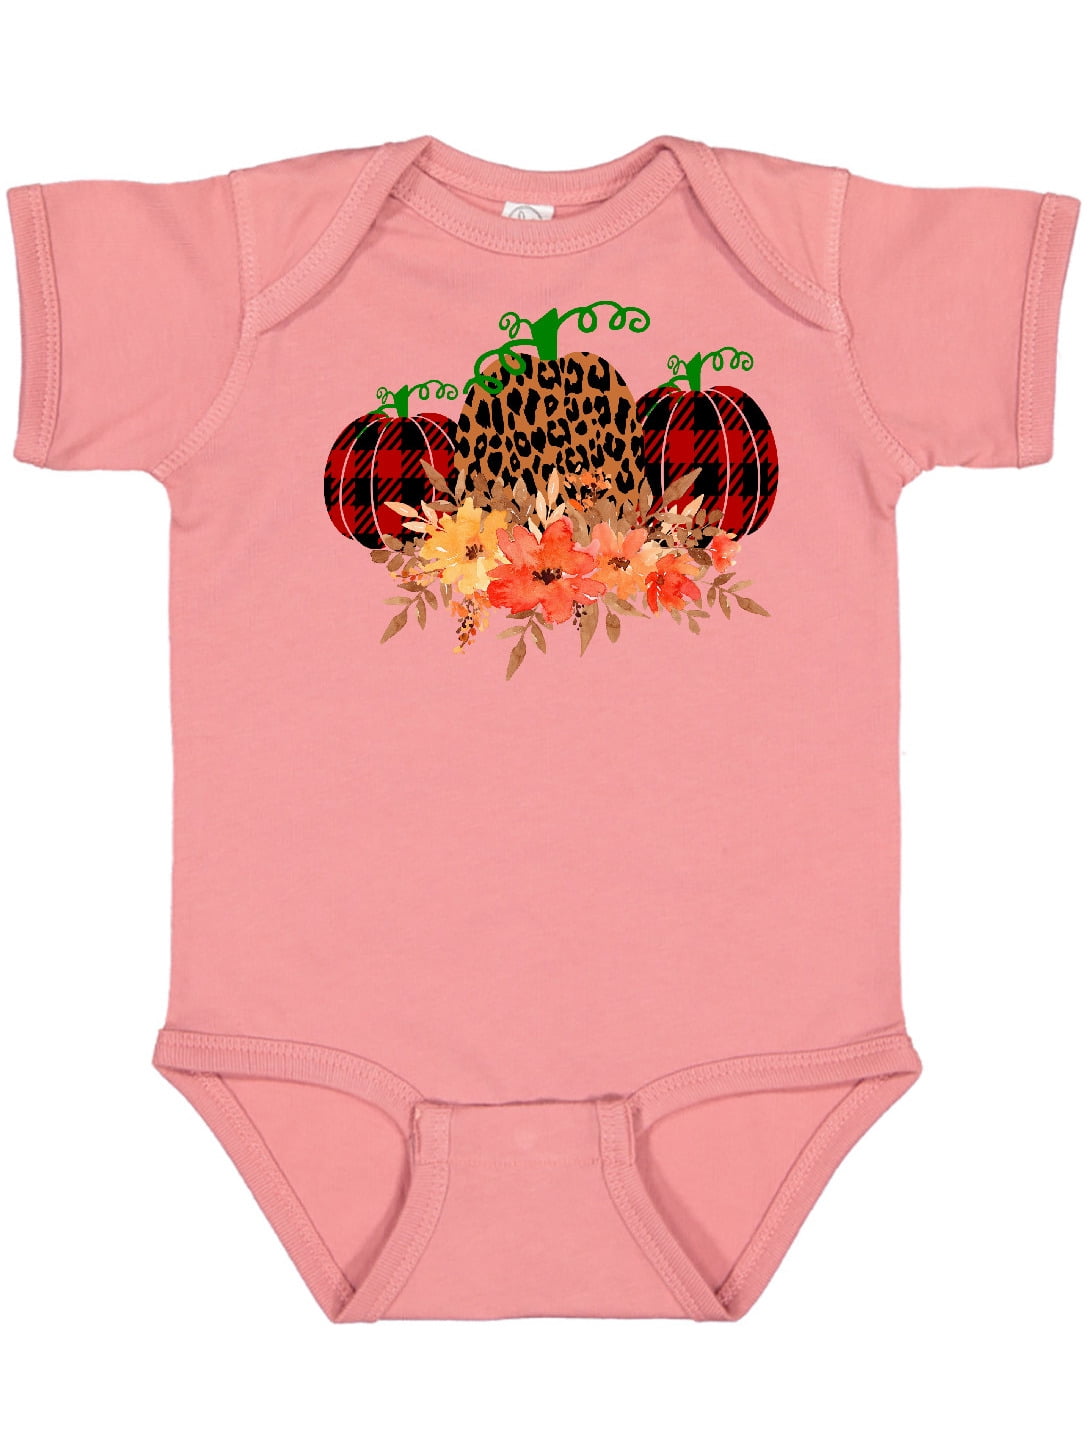 inktastic Patterned Pumpkin Patch Infant Creeper 